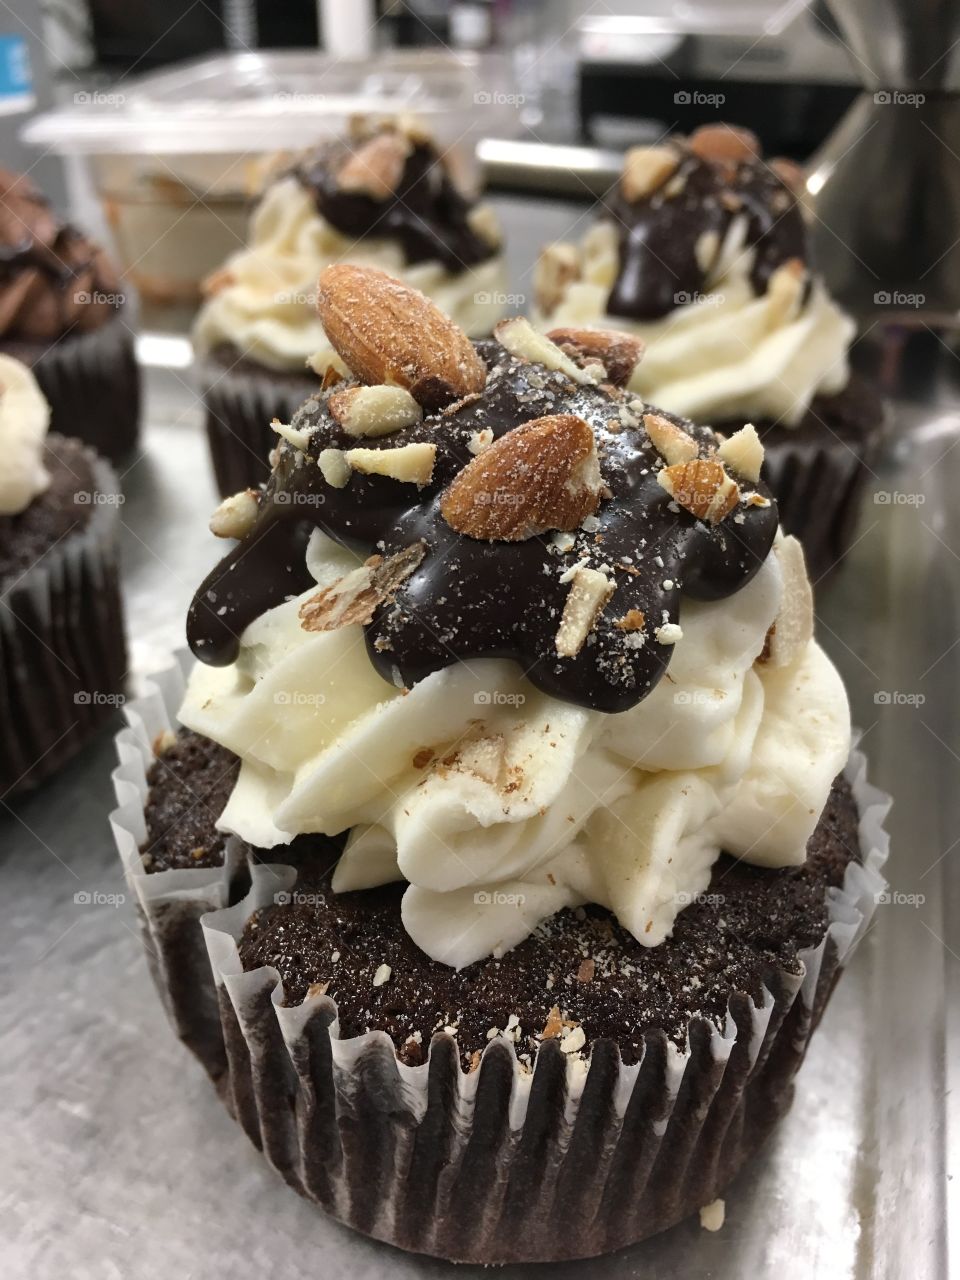 Almond Joy Cupcakes! My favorite! Chocolate cake, coconut frosting topped with melted chocolate, and chopped almonds!